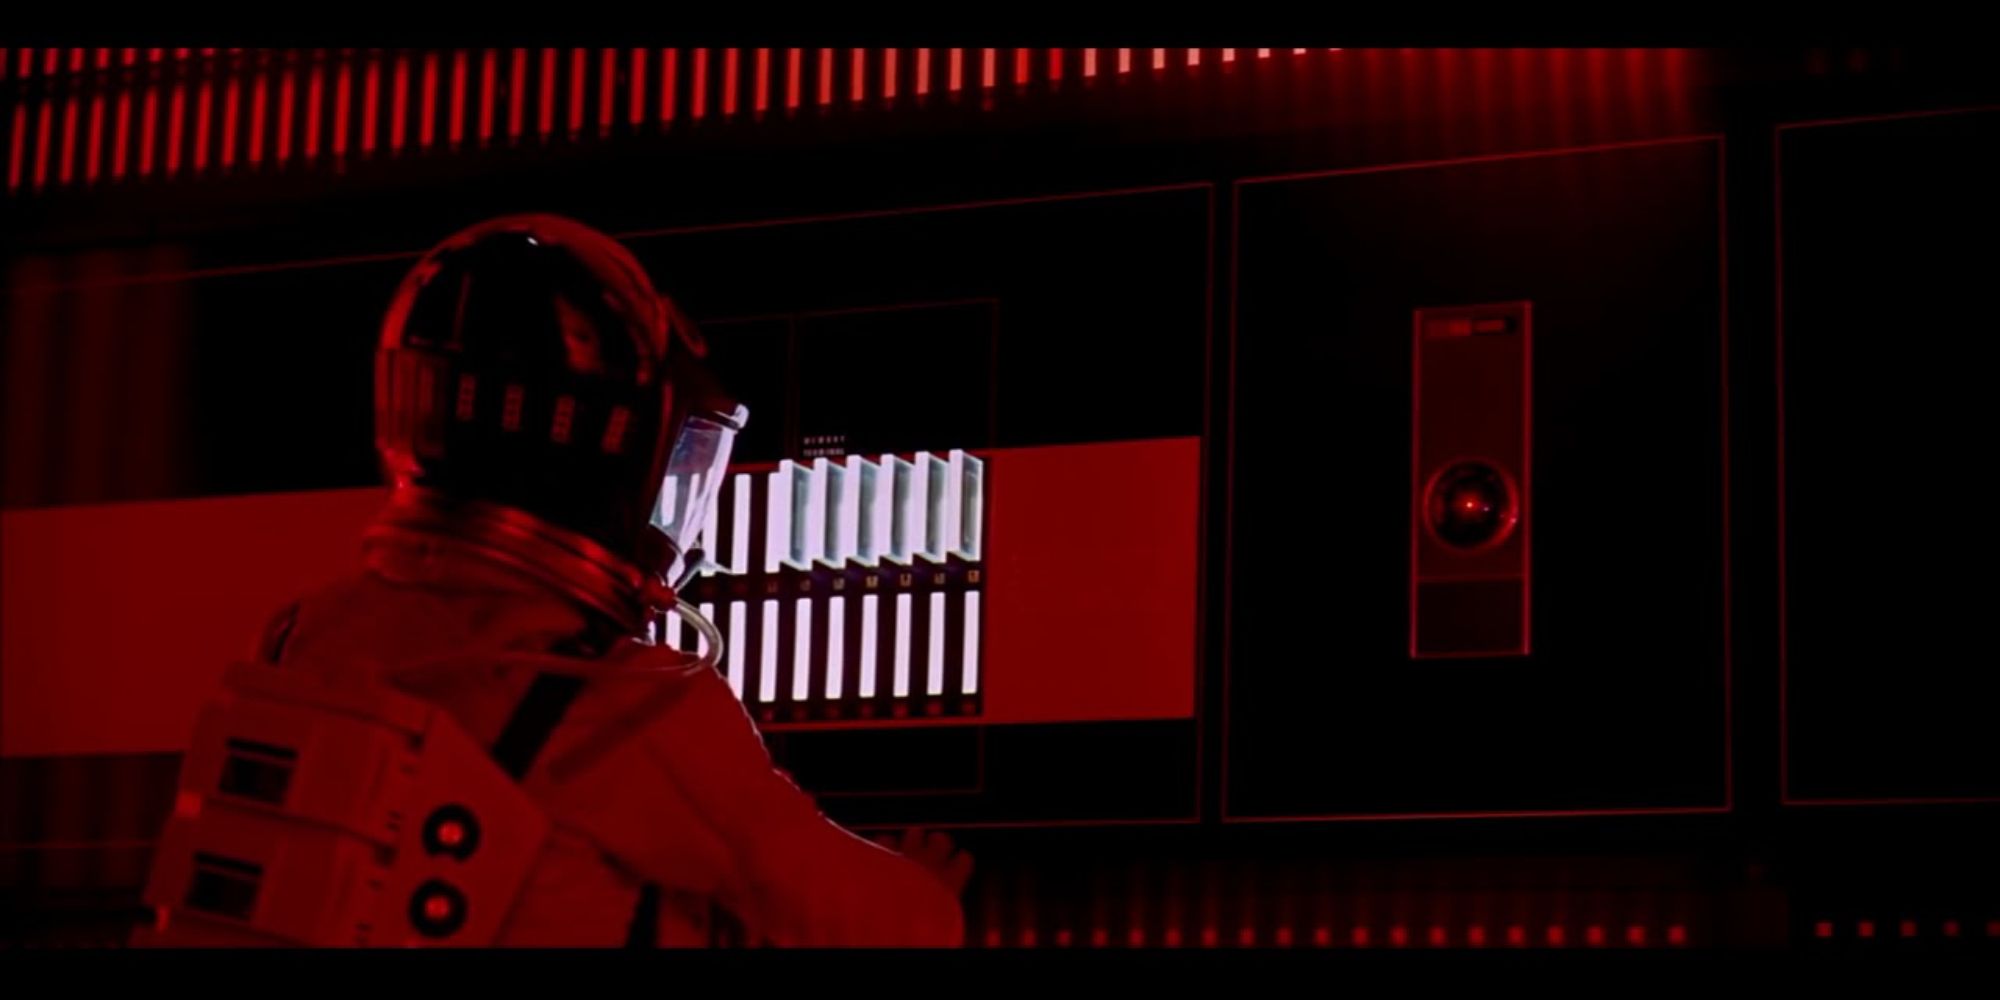 hal death scene from 2001 a space odyssey